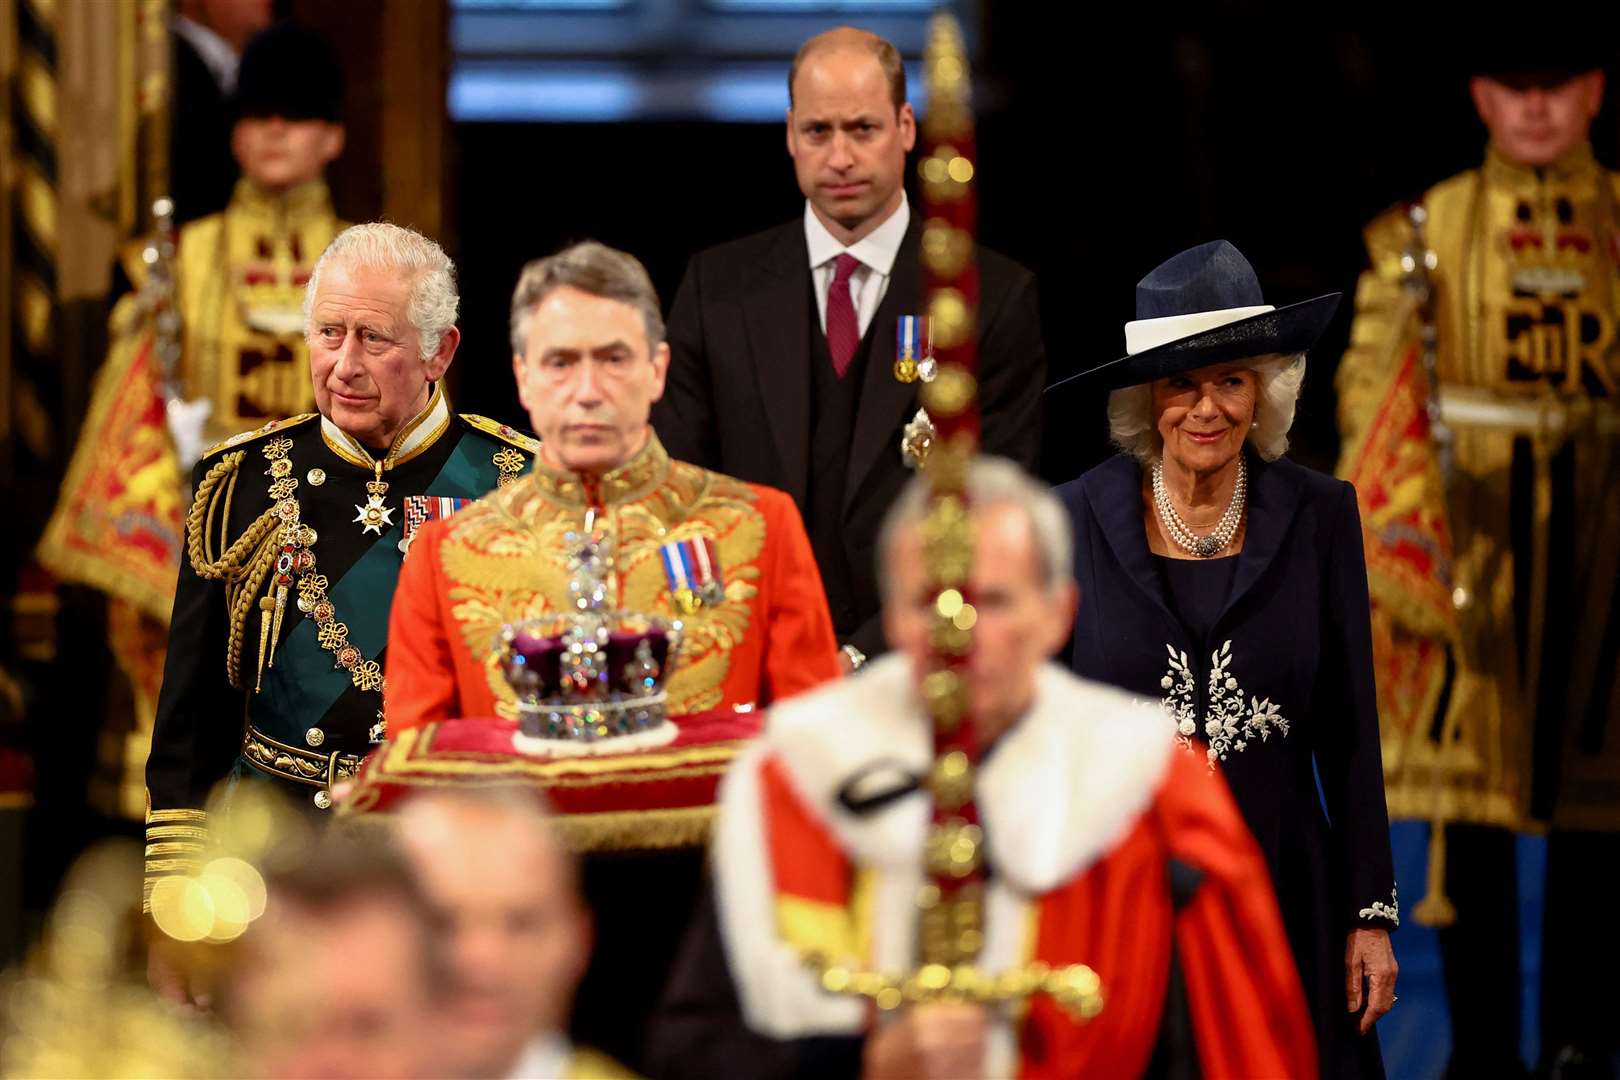 Charles and Camilla, followed by the Duke of Cambridge, proceed behind the Imperial State Crown through the Royal Gallery during the State Opening of Parliament in the House of Lords (Hannah McKay/PA)